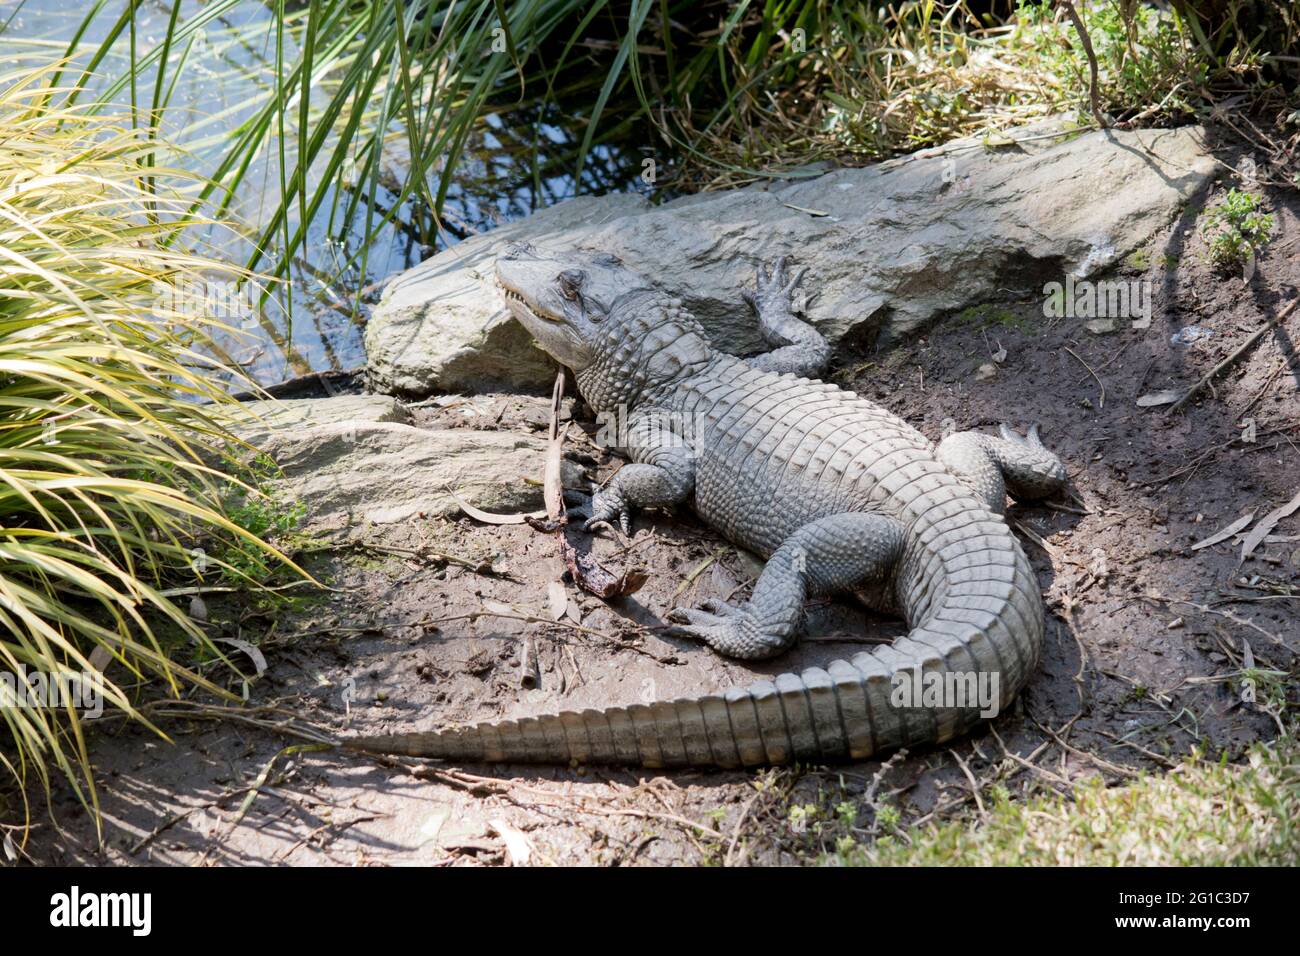 the alligator is resting in the sun as it is cold blooded Stock Photo